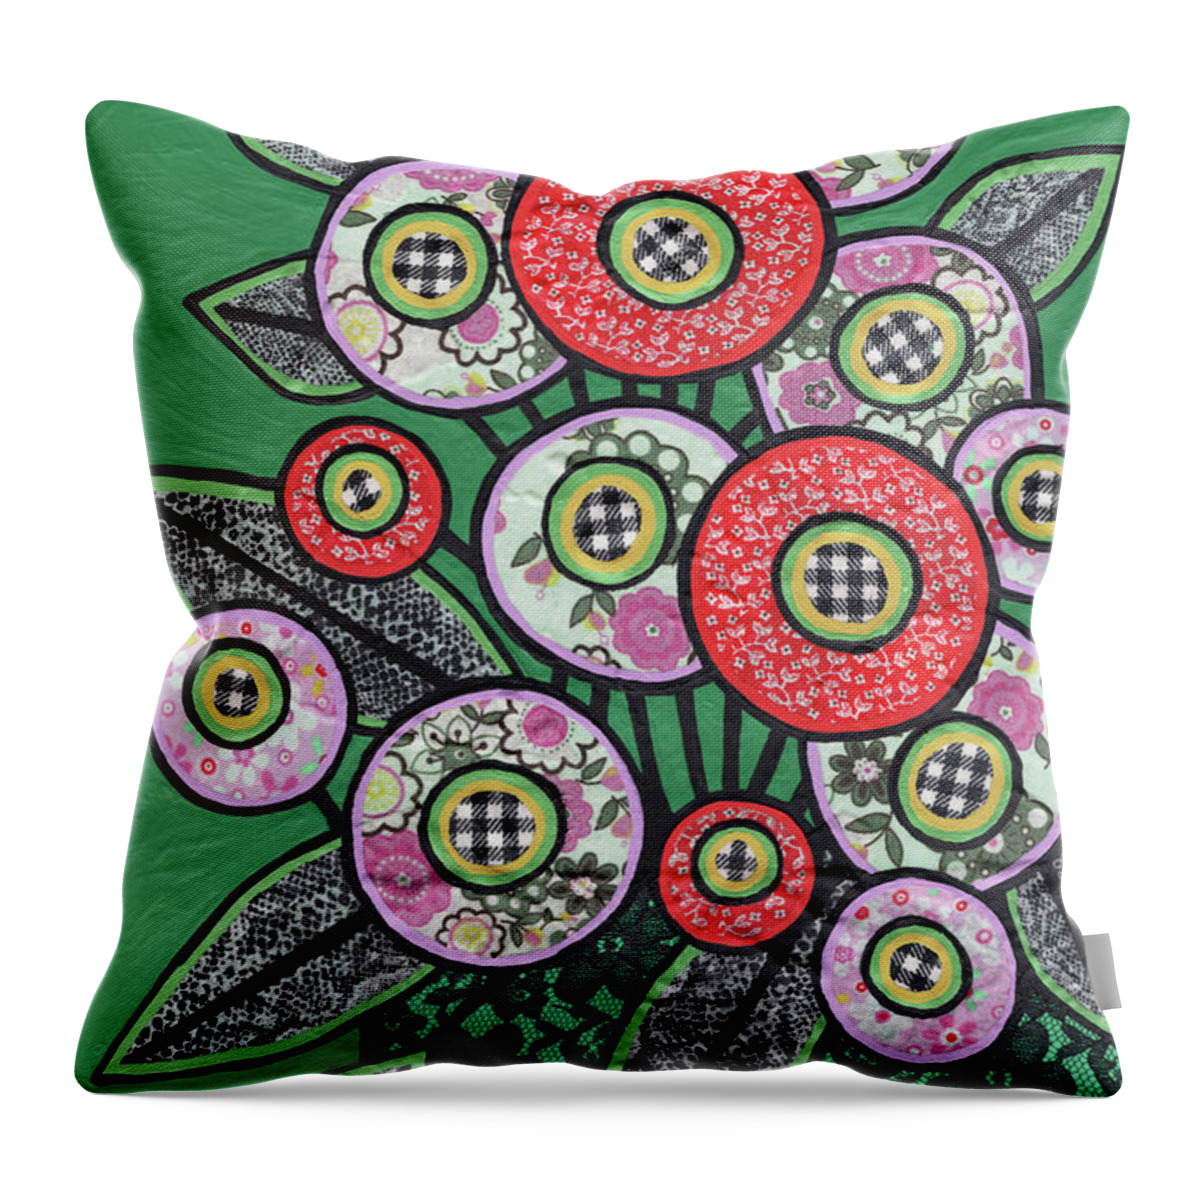 Flowers In A Vase Throw Pillow featuring the painting Black Lace Bouquet by Amy E Fraser